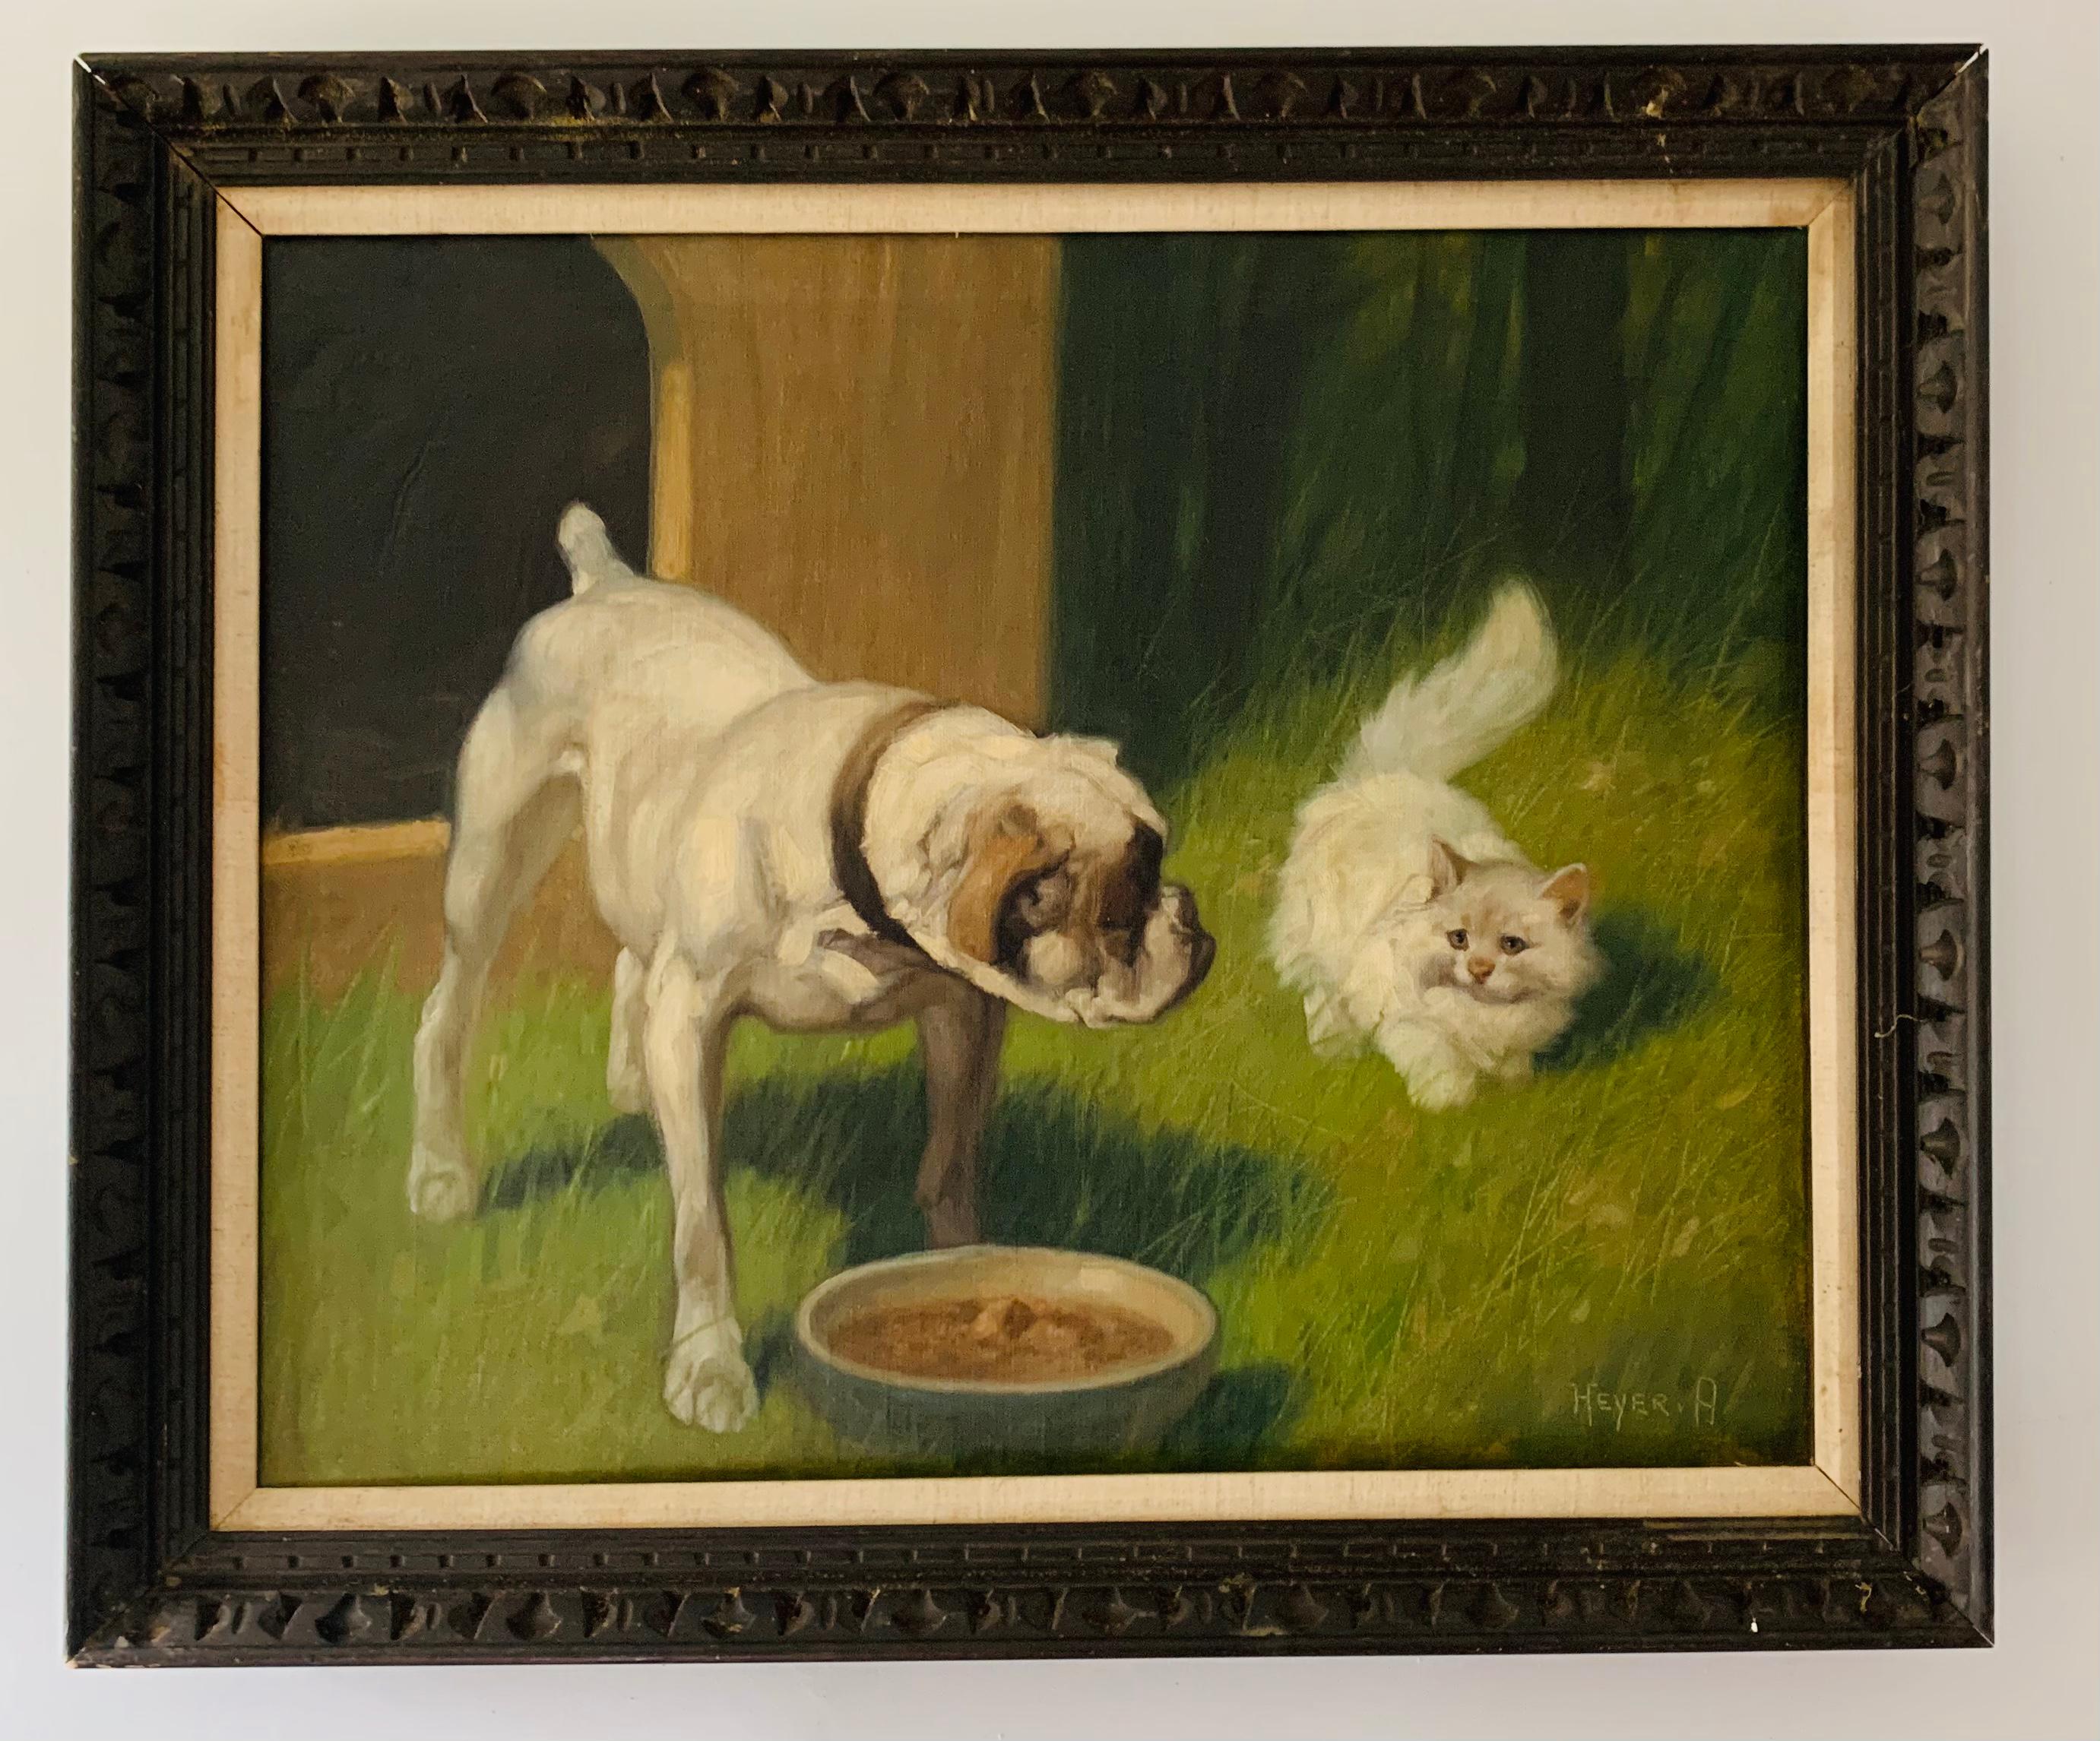 Arthur Heyer Animal Painting - Dog Guarding Food Bowl From a Fluffy White Cat